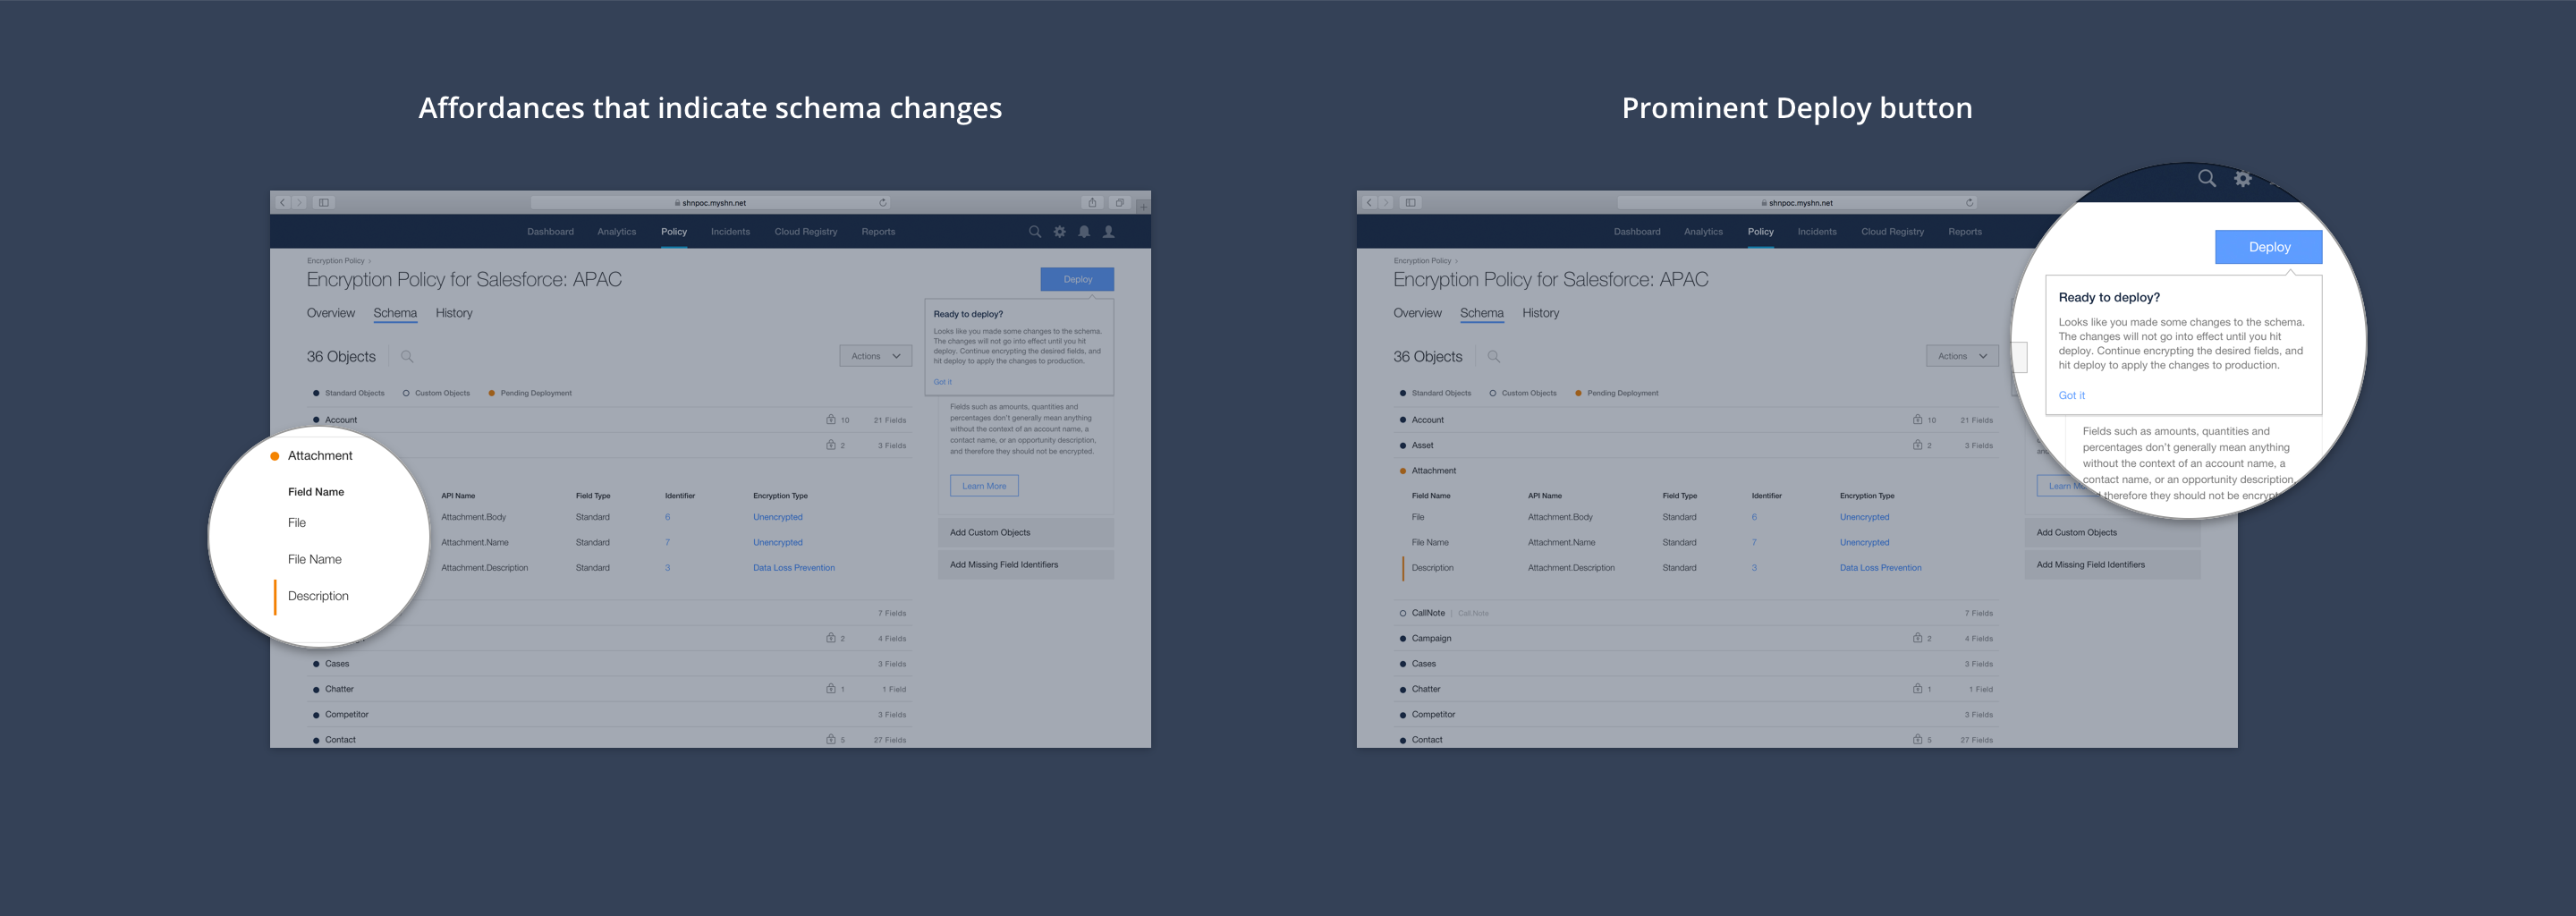 two screenshots of the UI with callouts. On the left, the affordances that indicate schema changes is called out. On the right, the prominent deploy button is called out.